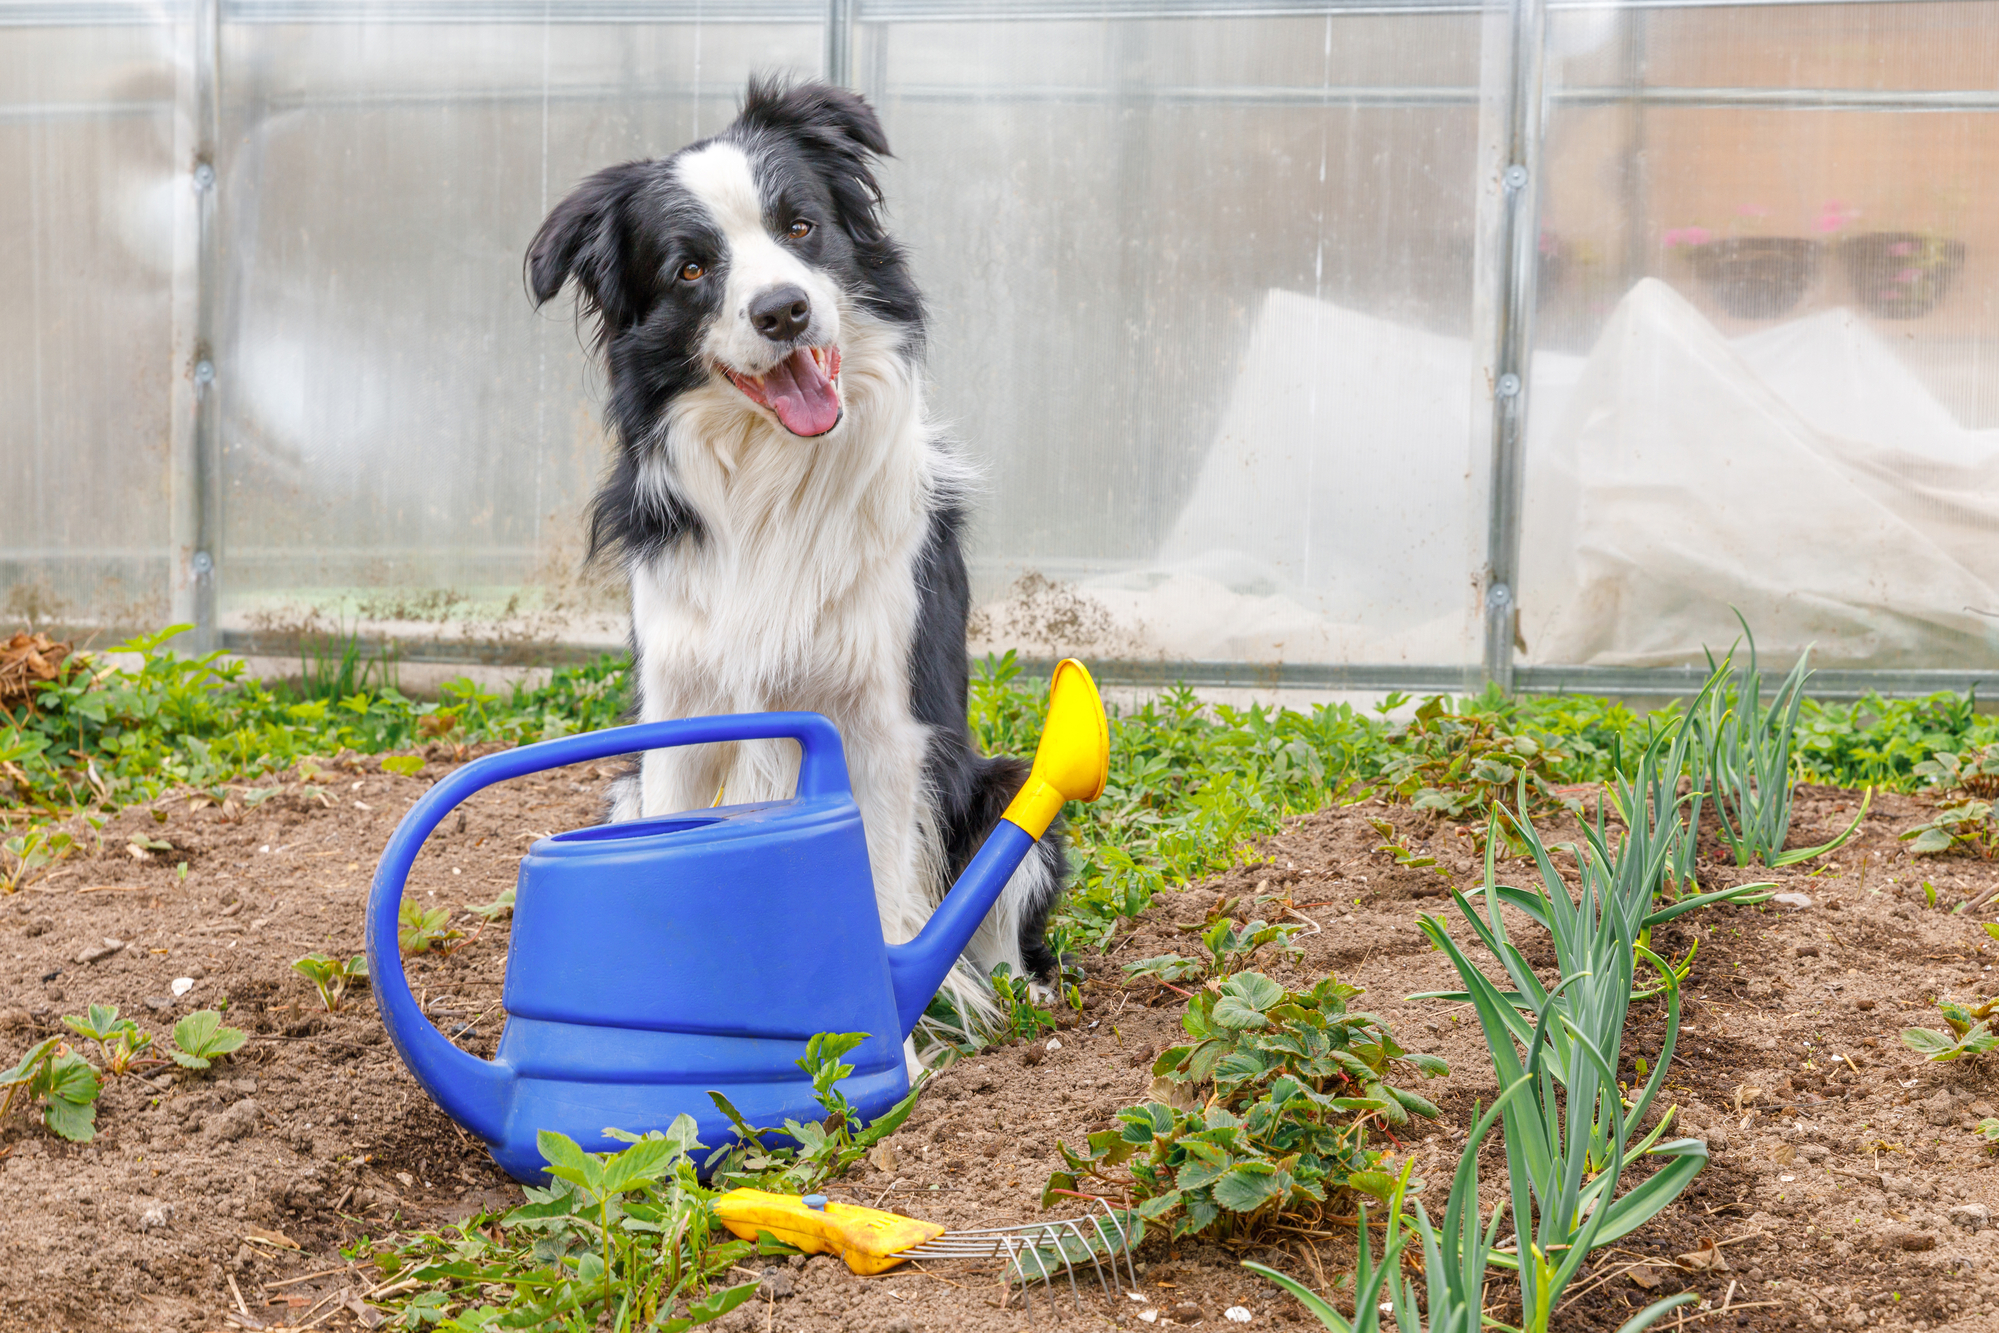 Outdoor Portrait Of Cute Smiling Dog Border Collie With Watering Can On Garden Background. Funny Puppy As Gardener Fetching Watering Can For Irrigation. Gardening And Agriculture Concept.